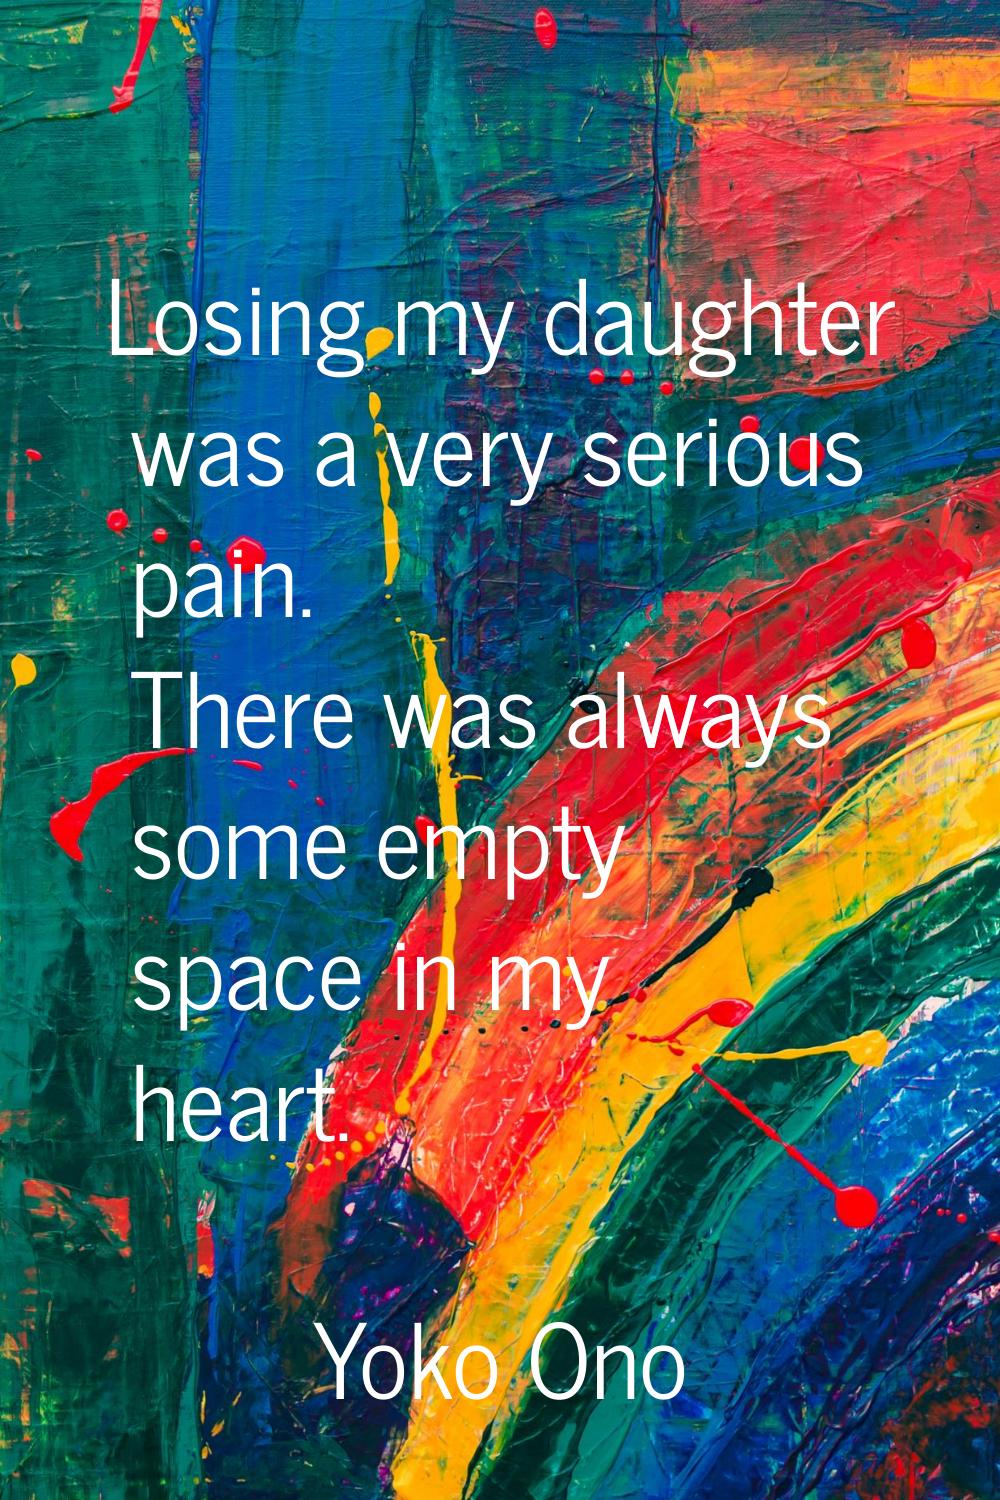 Losing my daughter was a very serious pain. There was always some empty space in my heart.